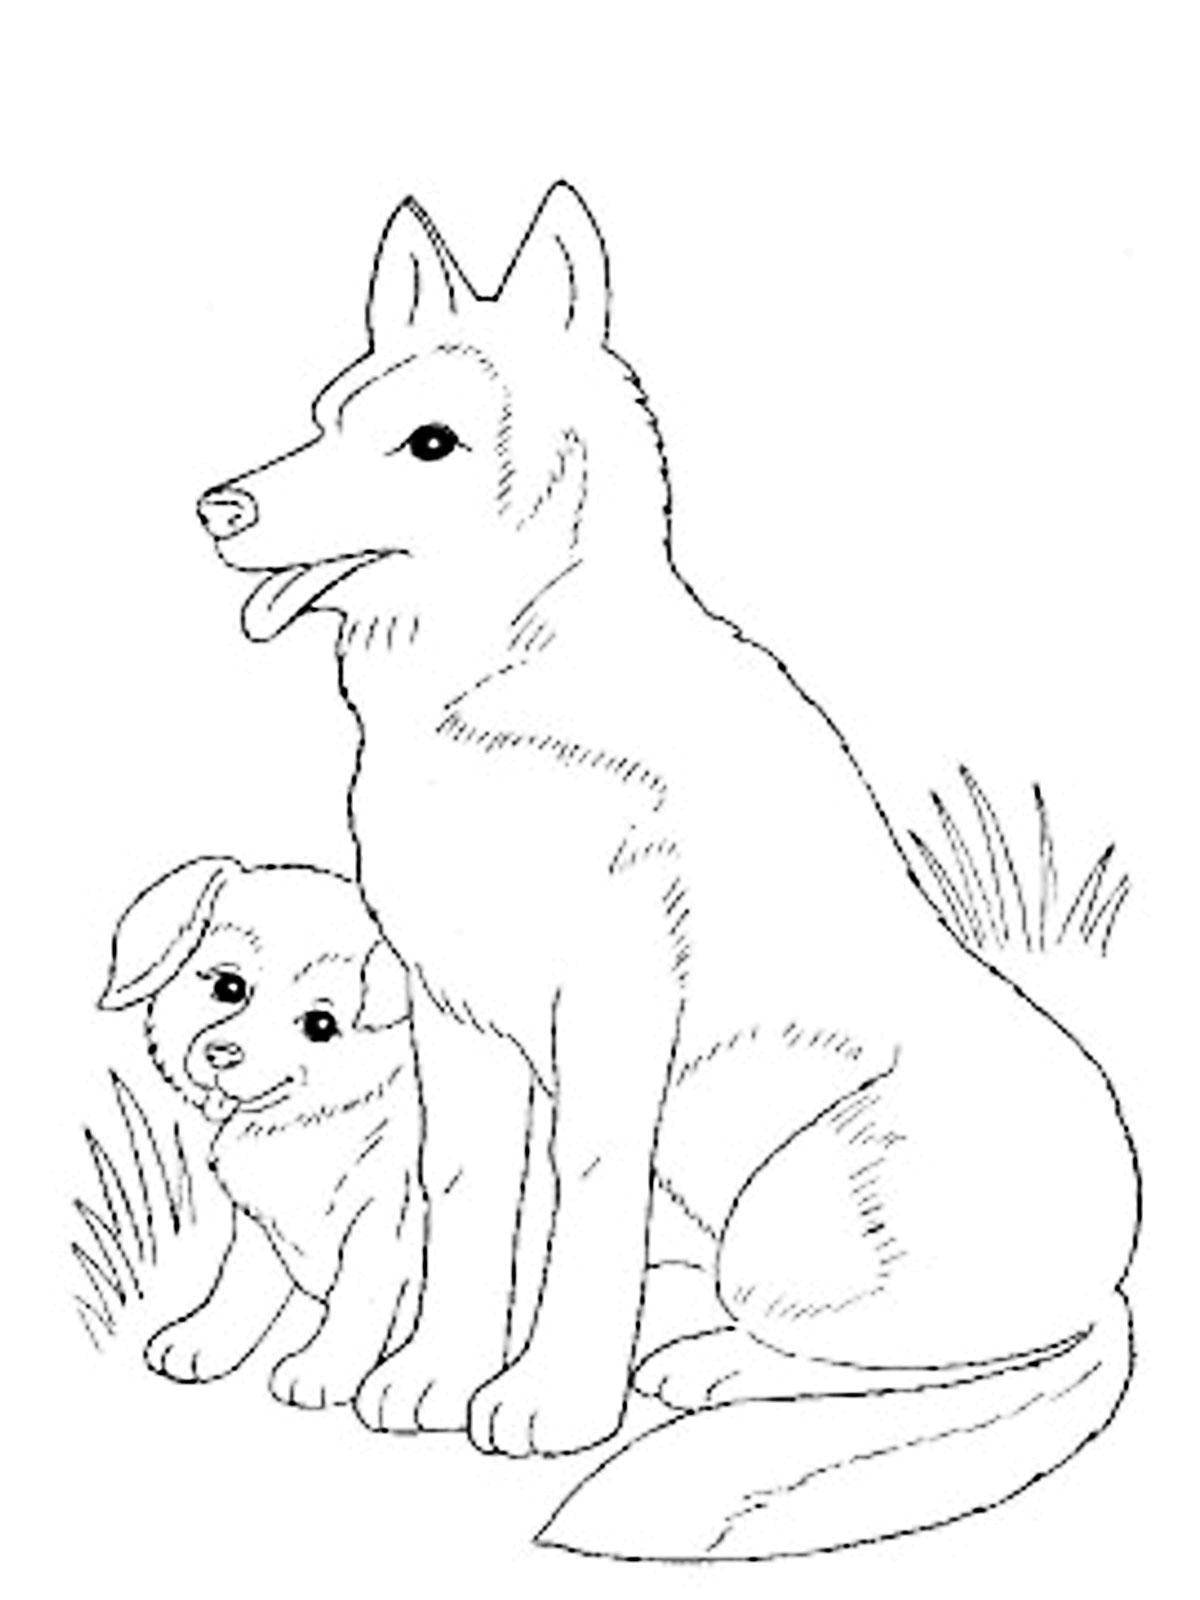 Coloring Mother dog with puppy. Category Pets allowed. Tags:  Animals, dog.